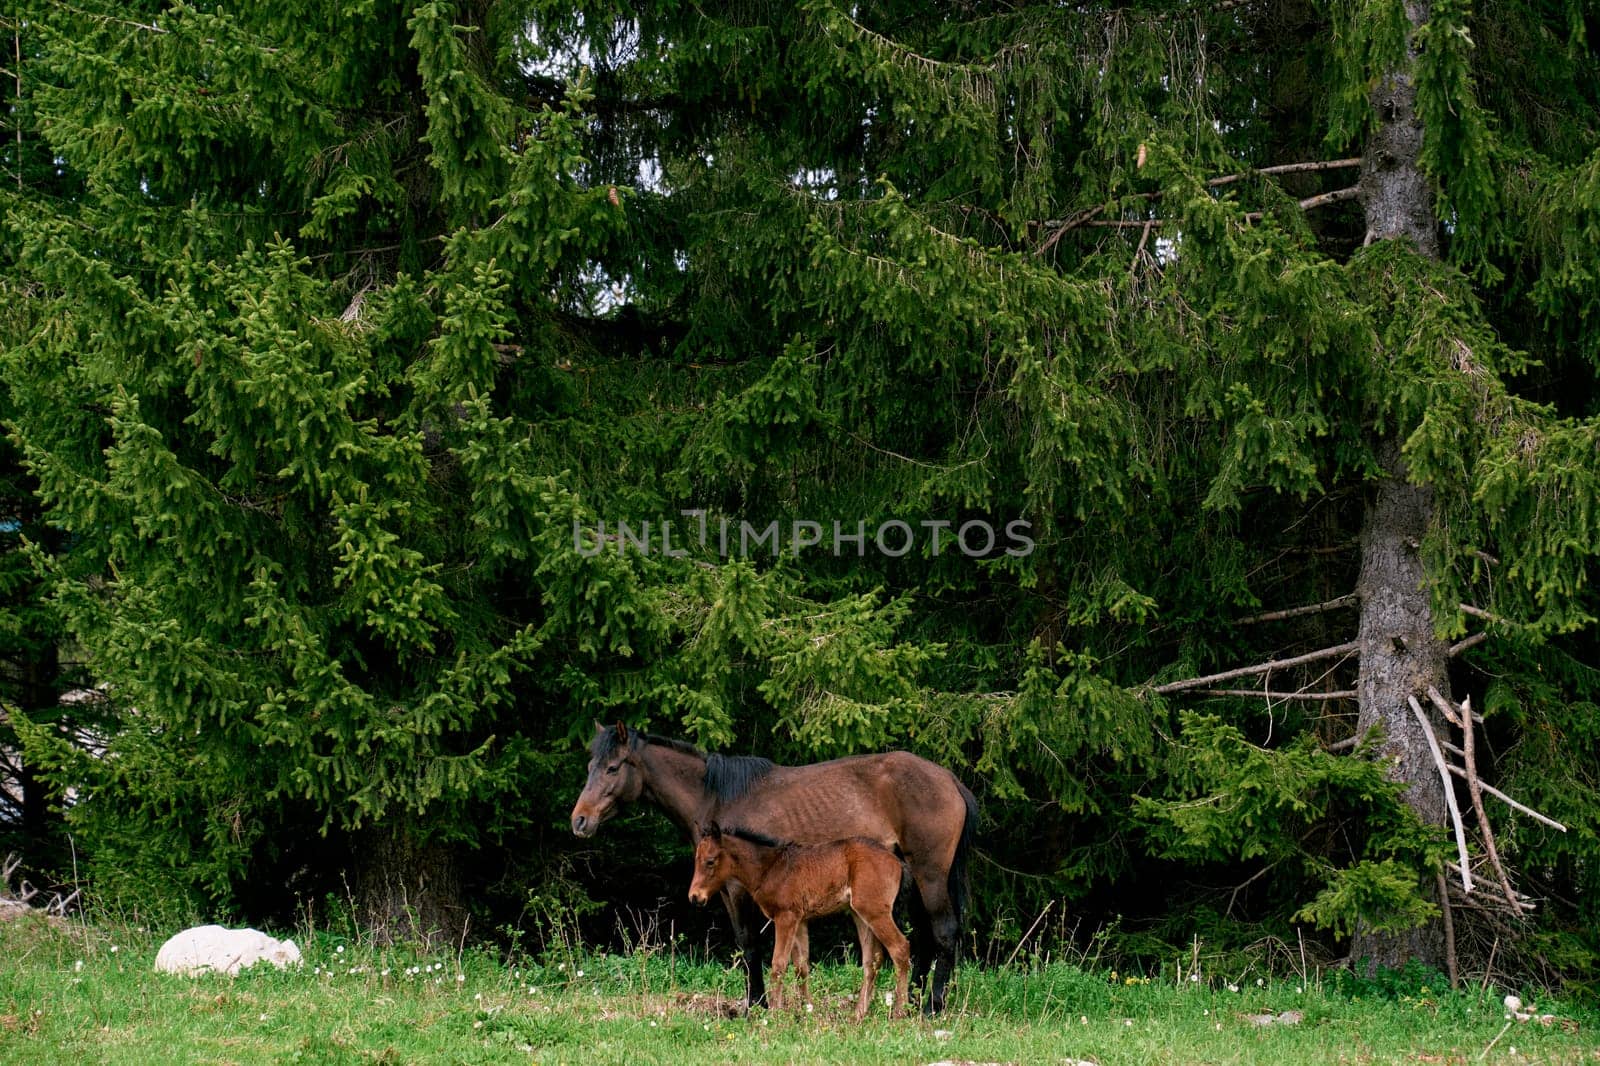 Bay mare with a foal stands near spruce trees on a green lawn. High quality photo